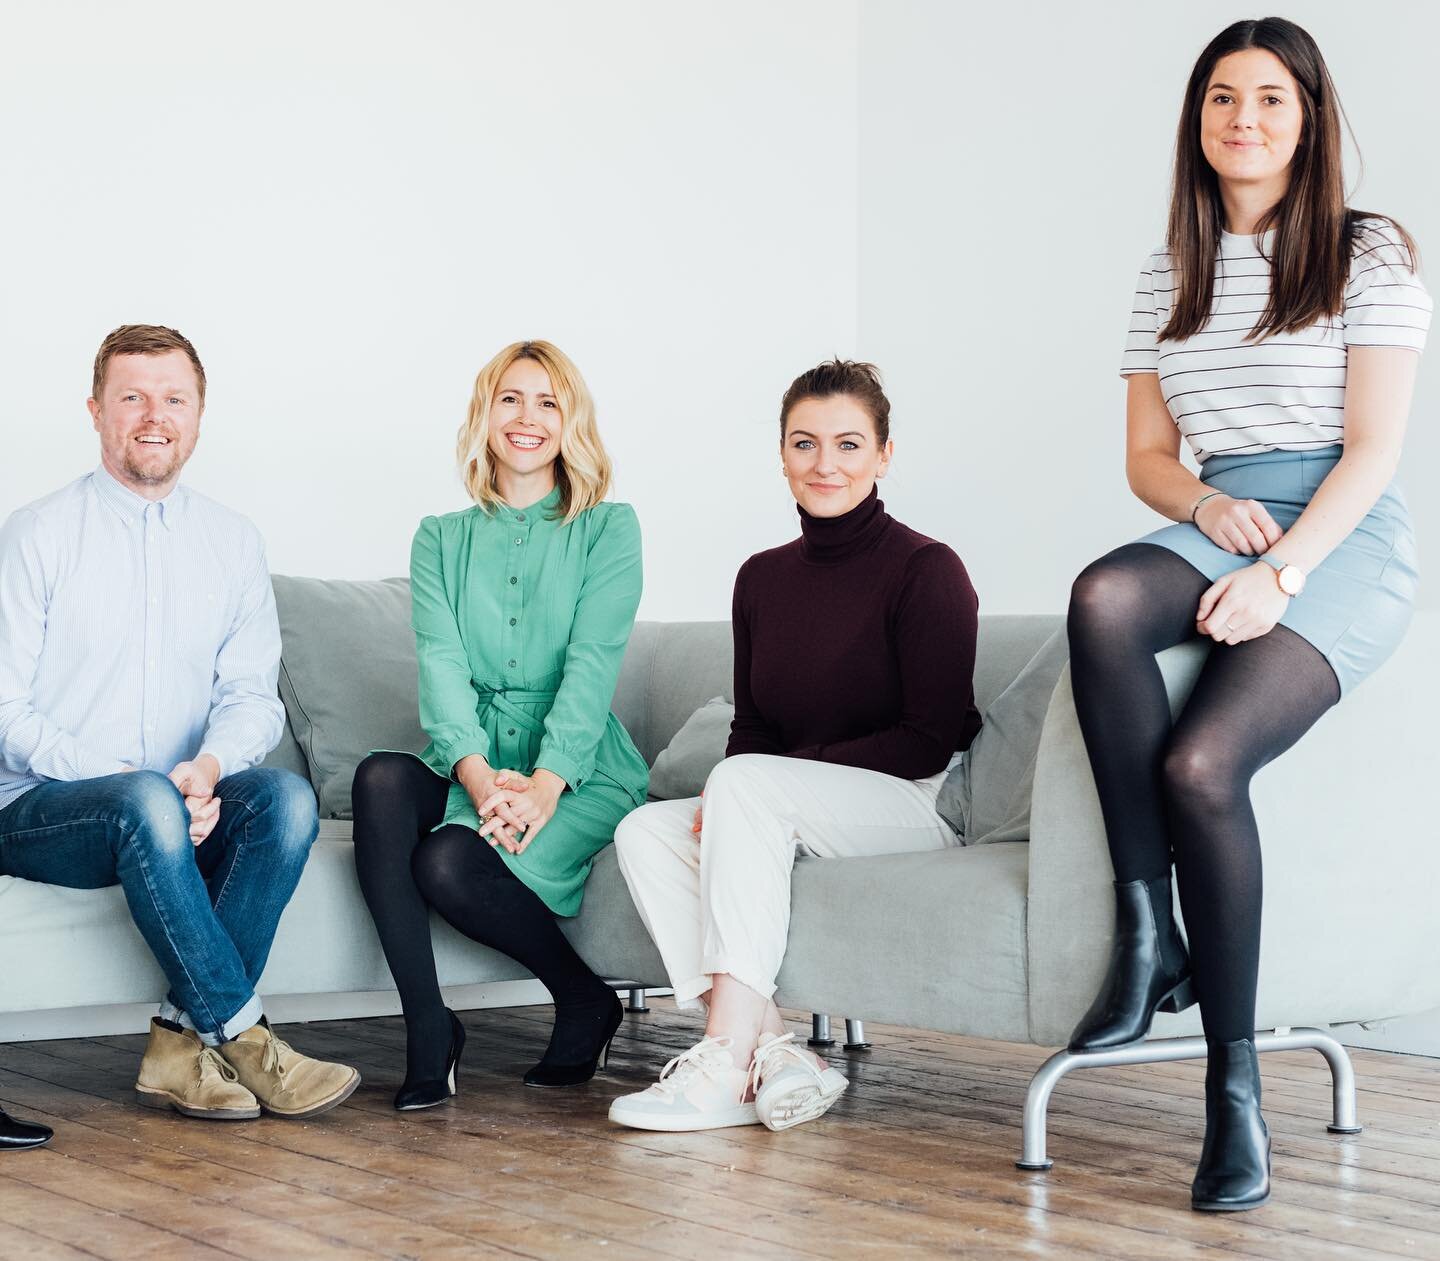 We&rsquo;ve loved getting to know these wonderful people. Meet @uklocations team, experts in having an eye for beautiful spaces. They&rsquo;ve set up camp with us at 34 Boar Lane. Here&rsquo;s what they have to say...

&ldquo;Working at 34 Boar Lane 